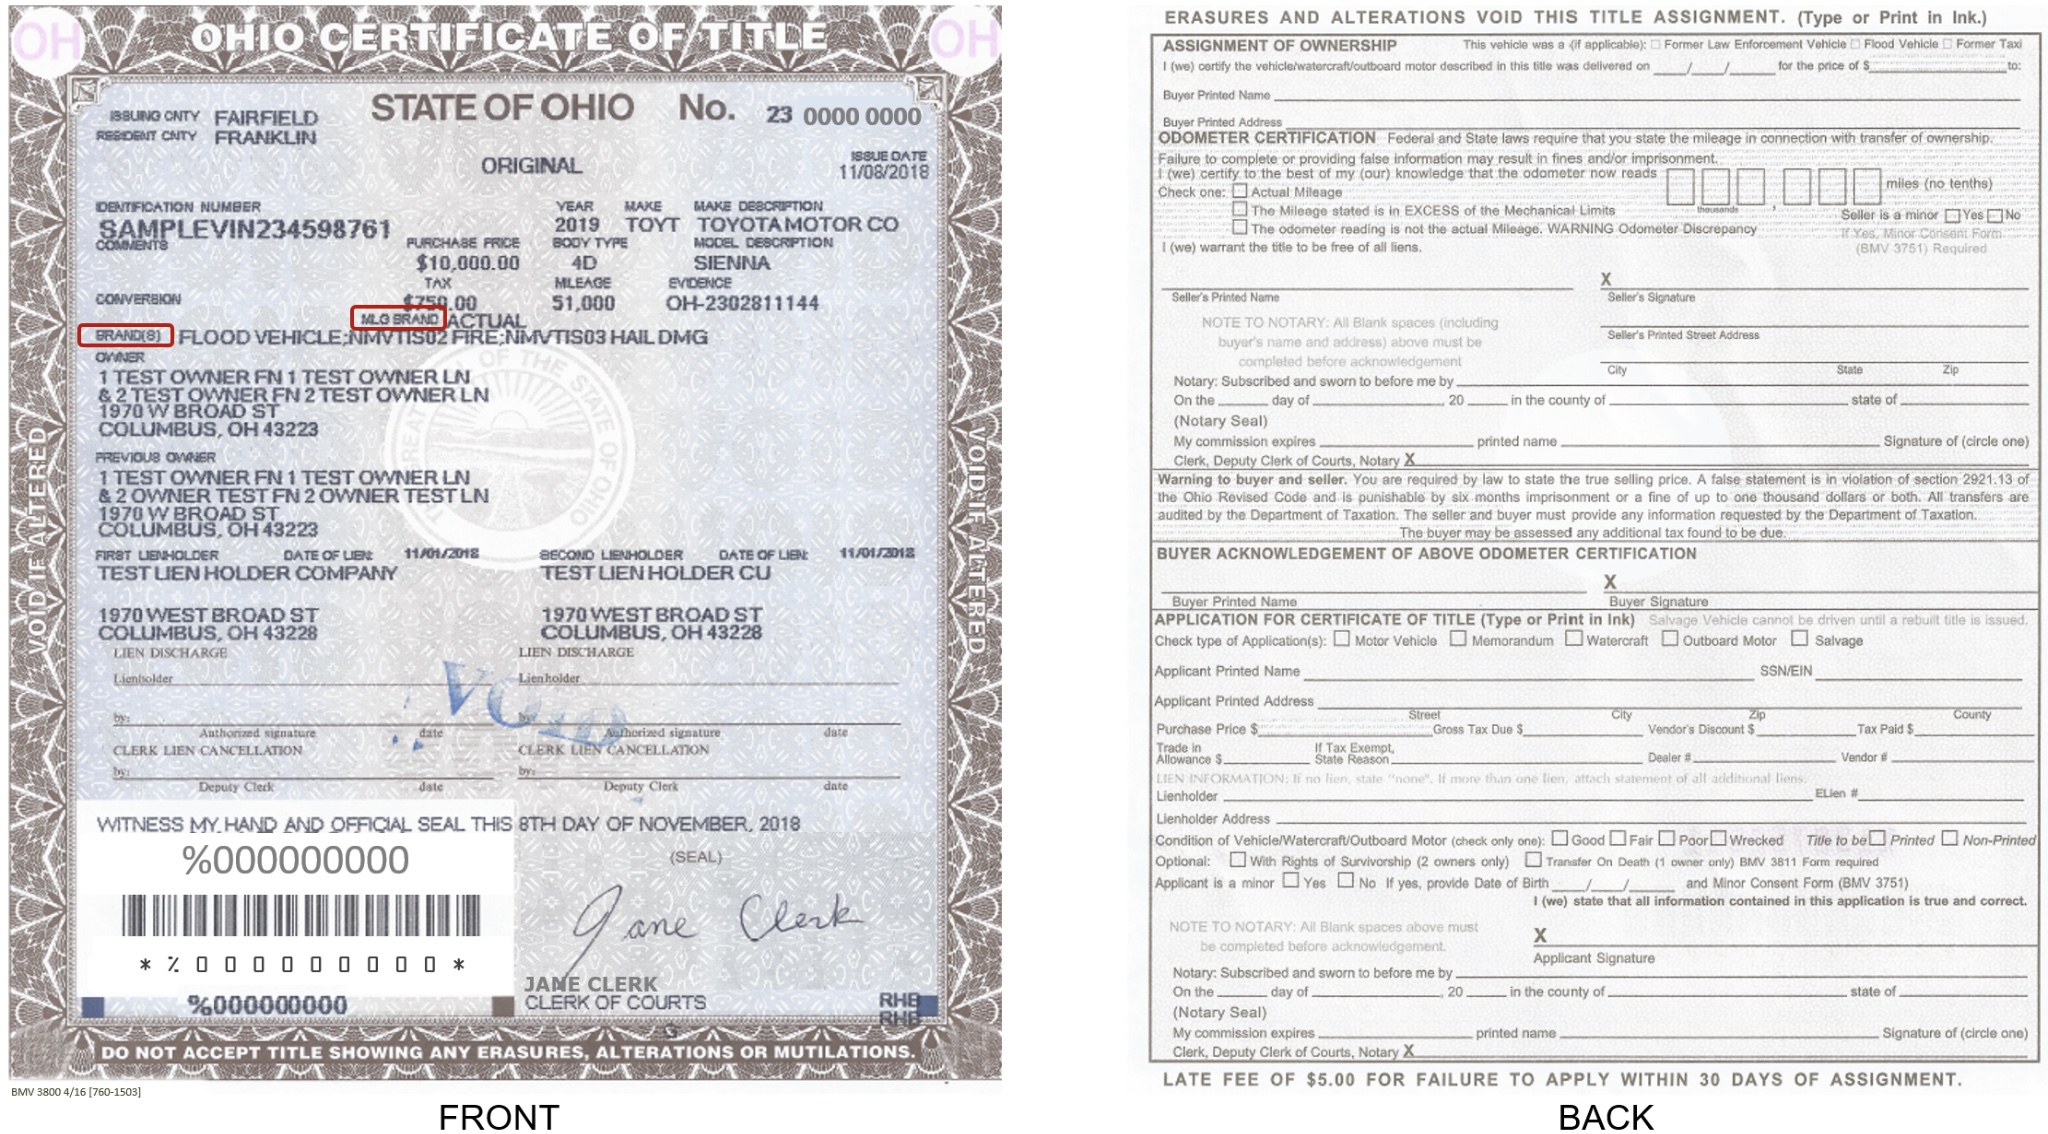 new-ohio-certificate-of-title-for-motor-vehicles-and-watercraft-meigs